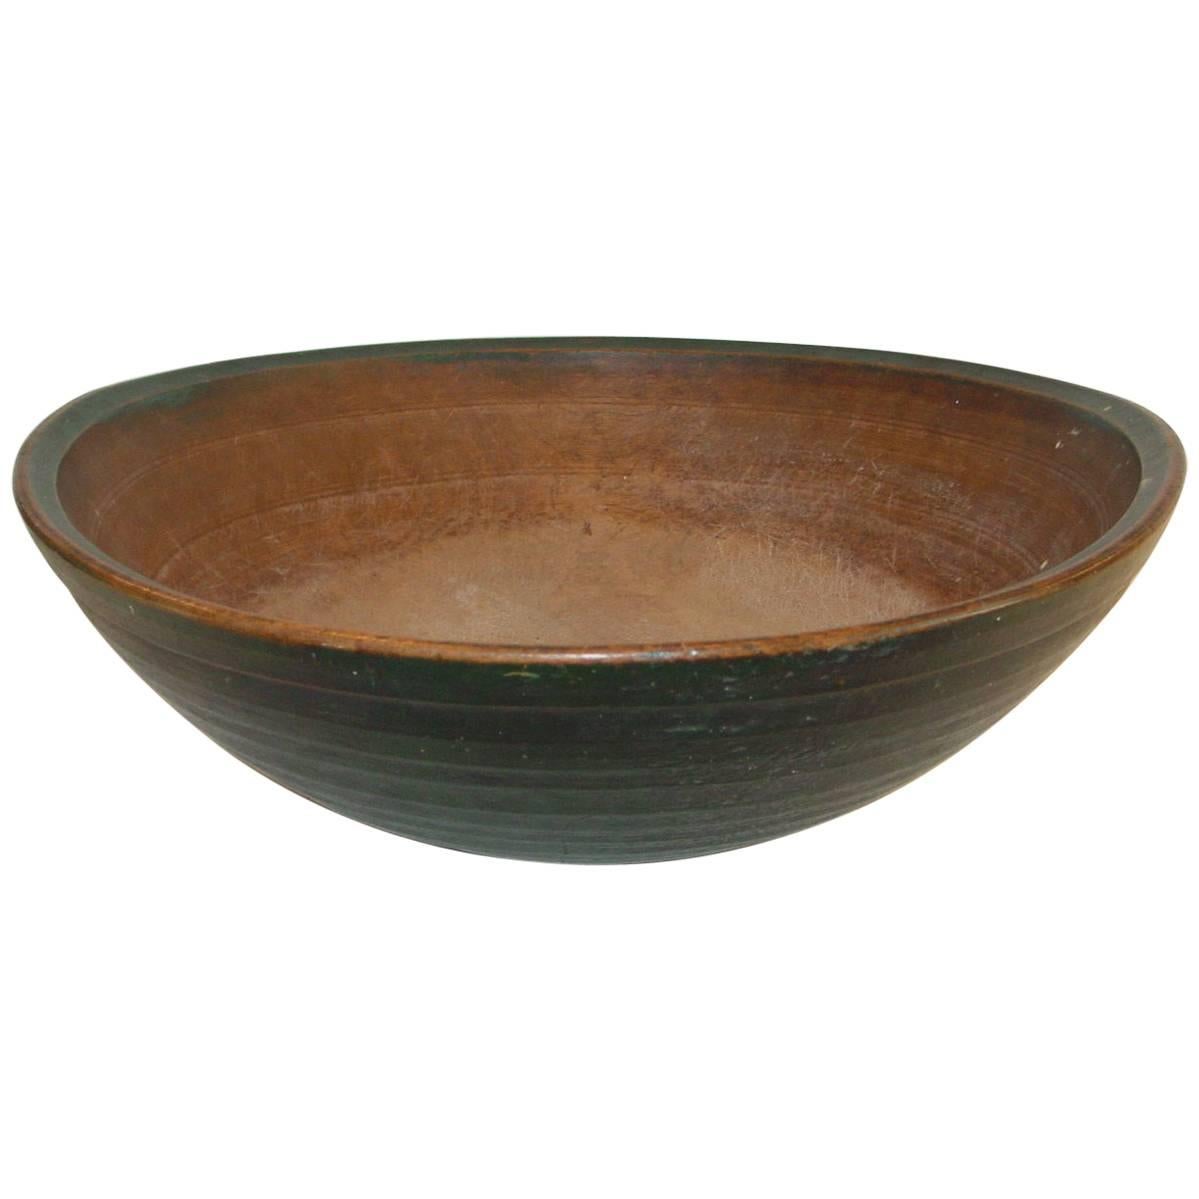 Deep Green-Painted Turned Treenware Bowl